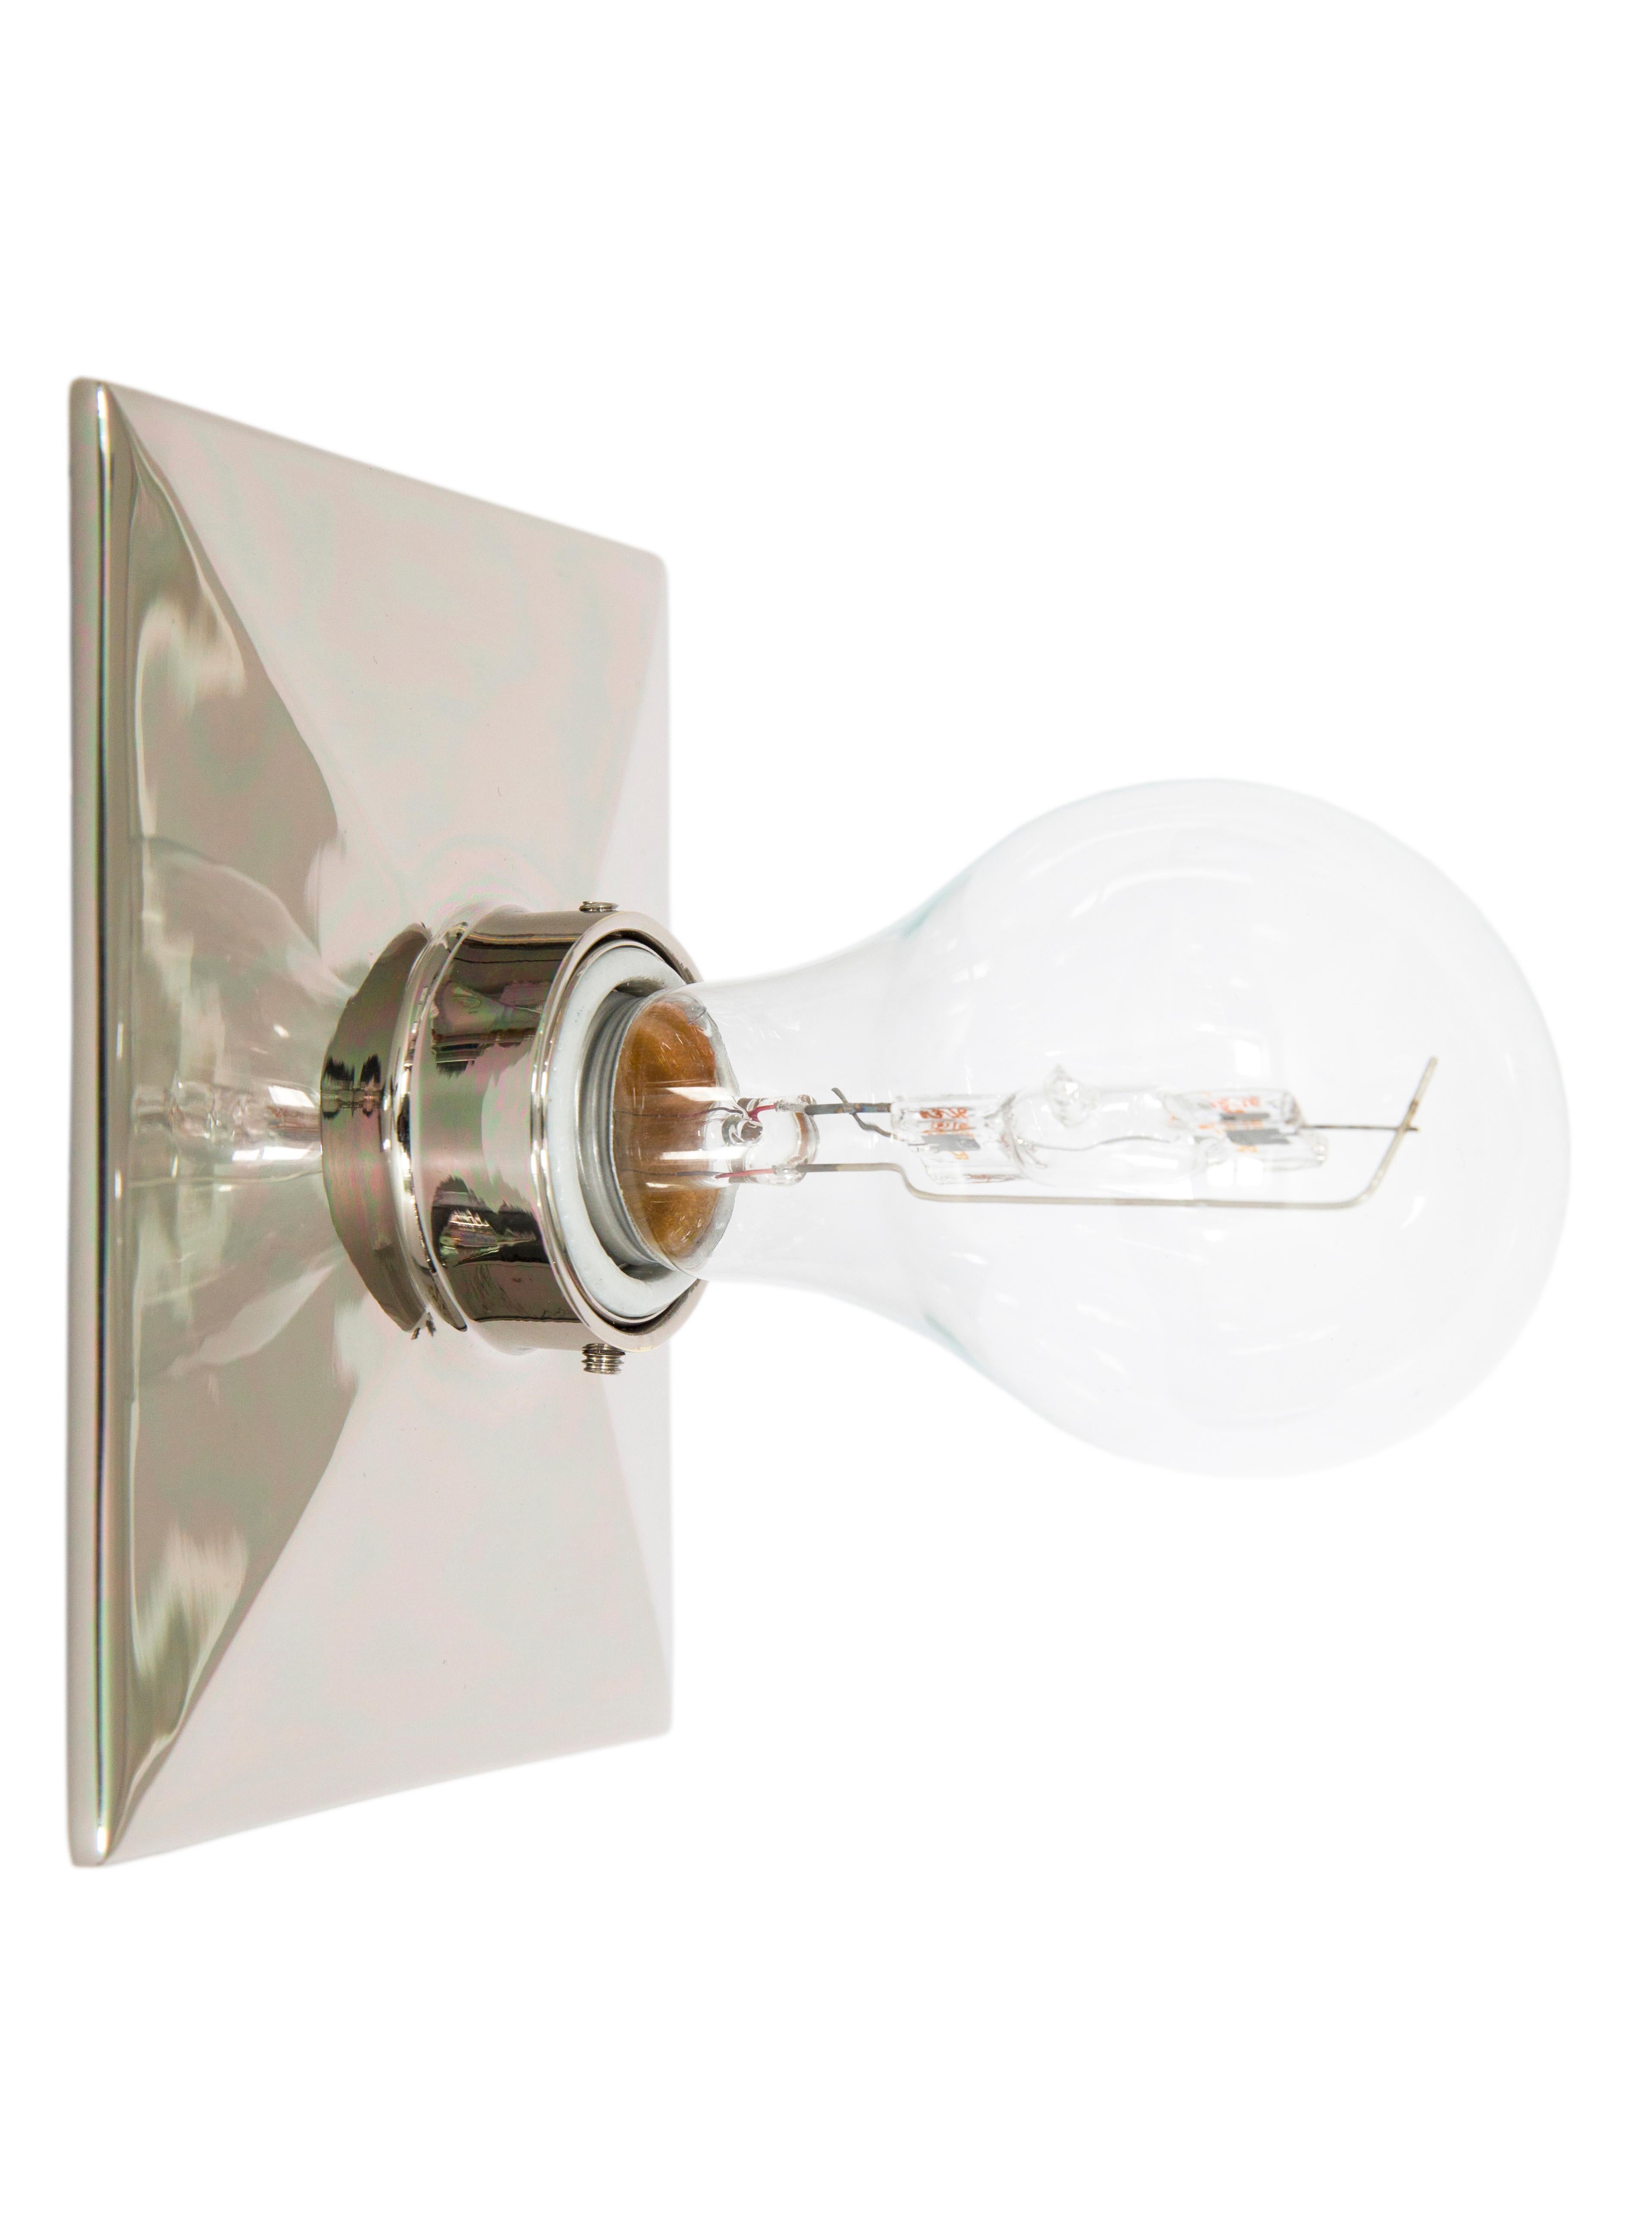 The Vica Light is a rectangular cast metal escutcheon plate with a beveled edge design and porcelain socket. The fixture can be wall or ceiling mounted. 

The maximum wattage bulb recommended is 60W. The Vica Light is UL listed.

Handcrafted in